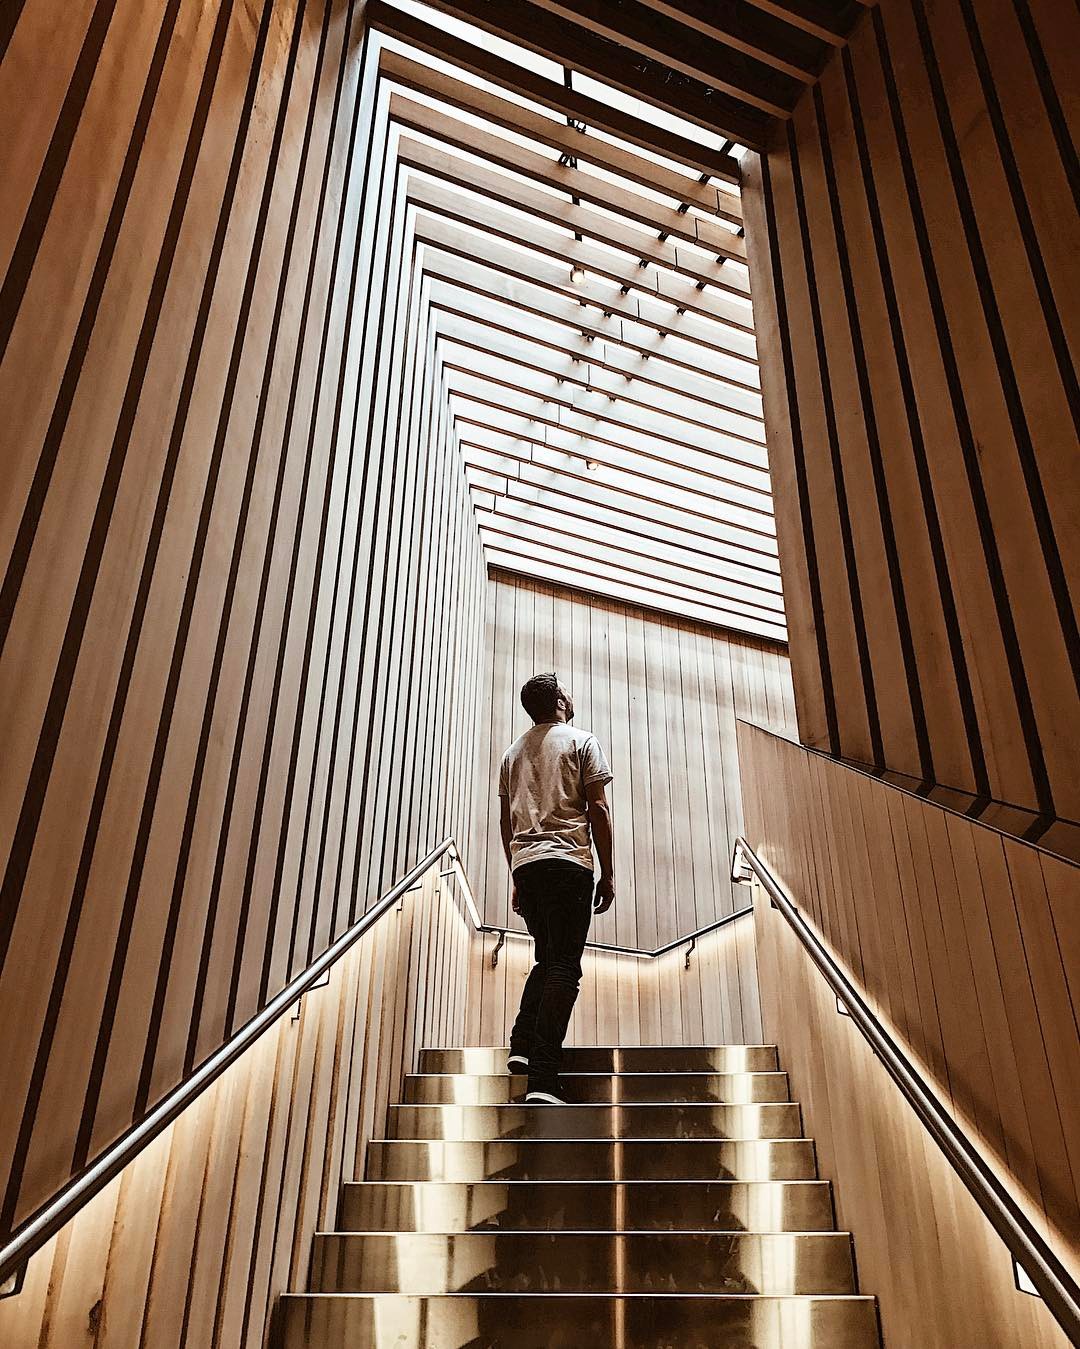 A man looks up at the wood slat ceiling from the top of a staircase inside the Audain Art Museum